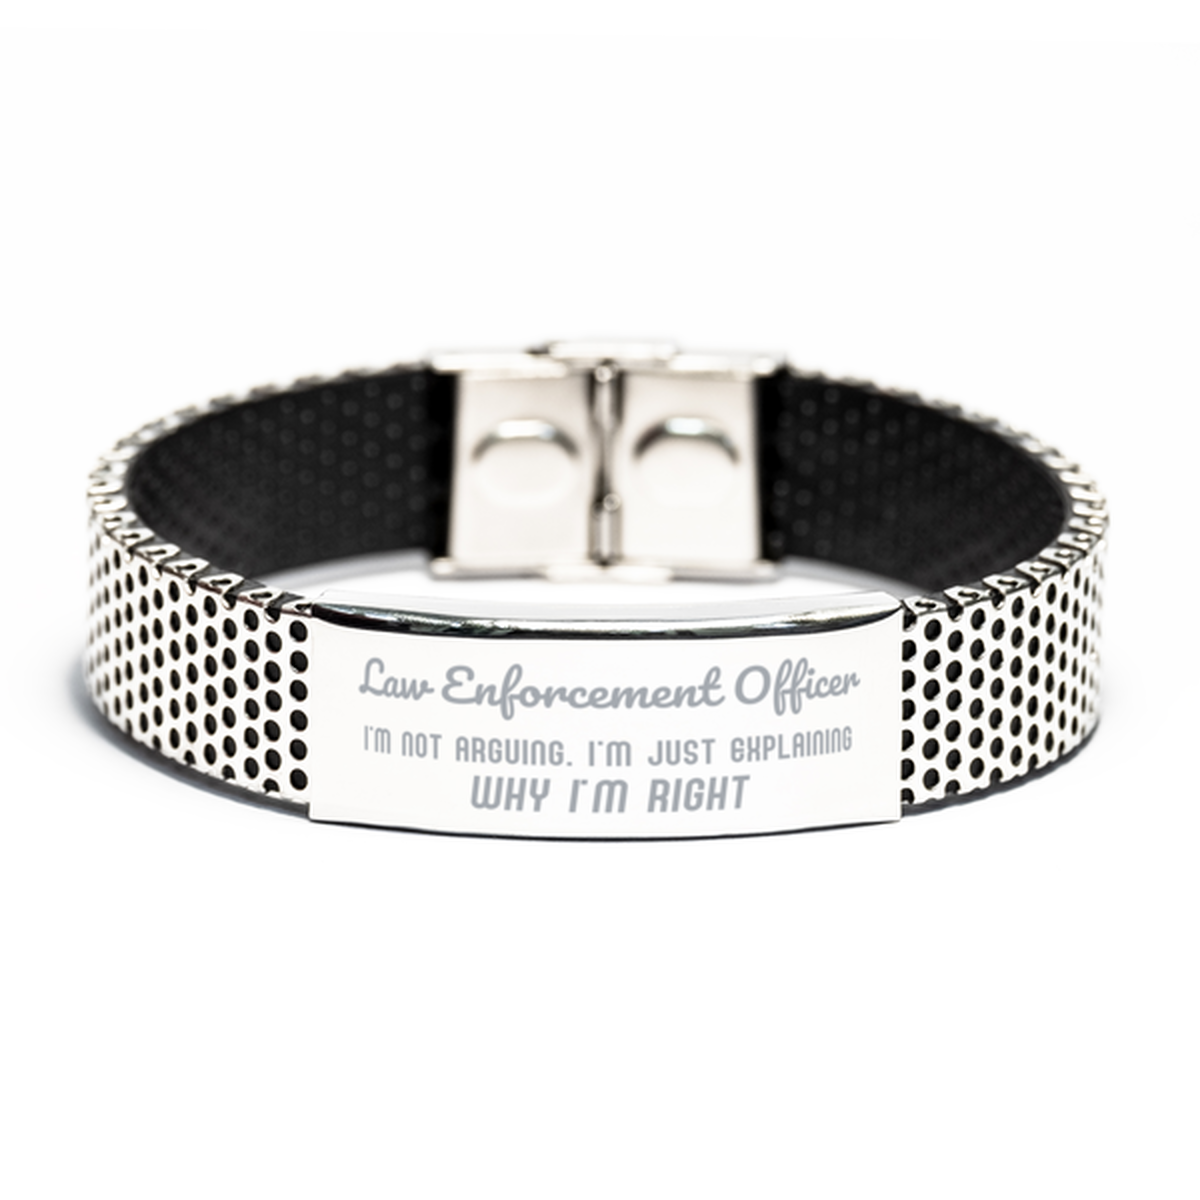 Law Enforcement Officer I'm not Arguing. I'm Just Explaining Why I'm RIGHT Stainless Steel Bracelet, Funny Saying Quote Law Enforcement Officer Gifts For Law Enforcement Officer Graduation Birthday Christmas Gifts for Men Women Coworker